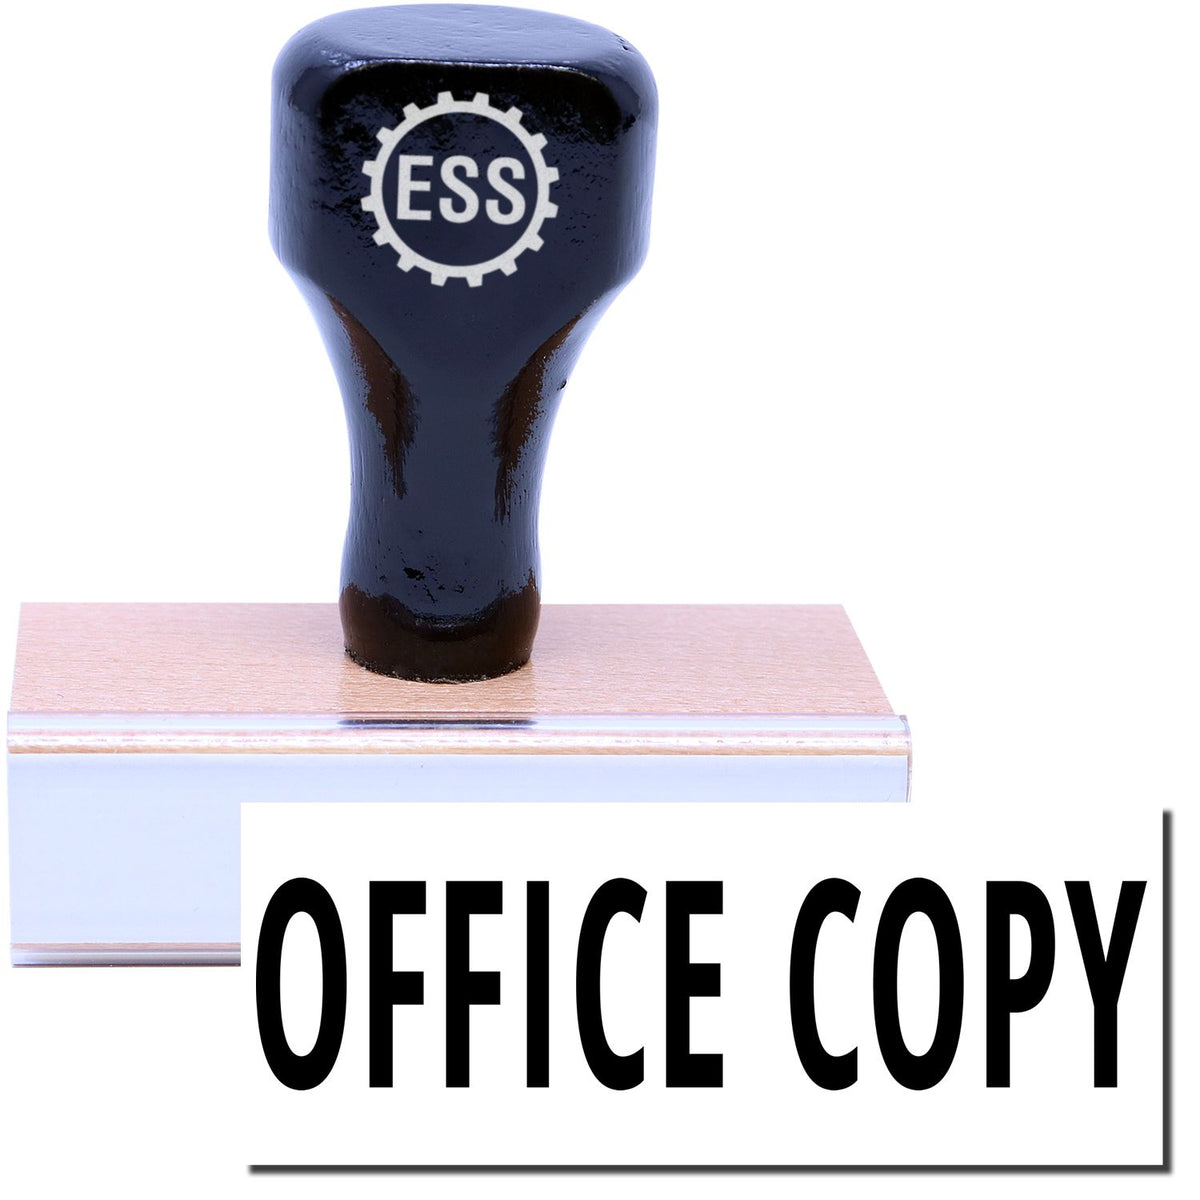 A stock office rubber stamp with a stamped image showing how the text &quot;OFFICE COPY&quot; is displayed after stamping.